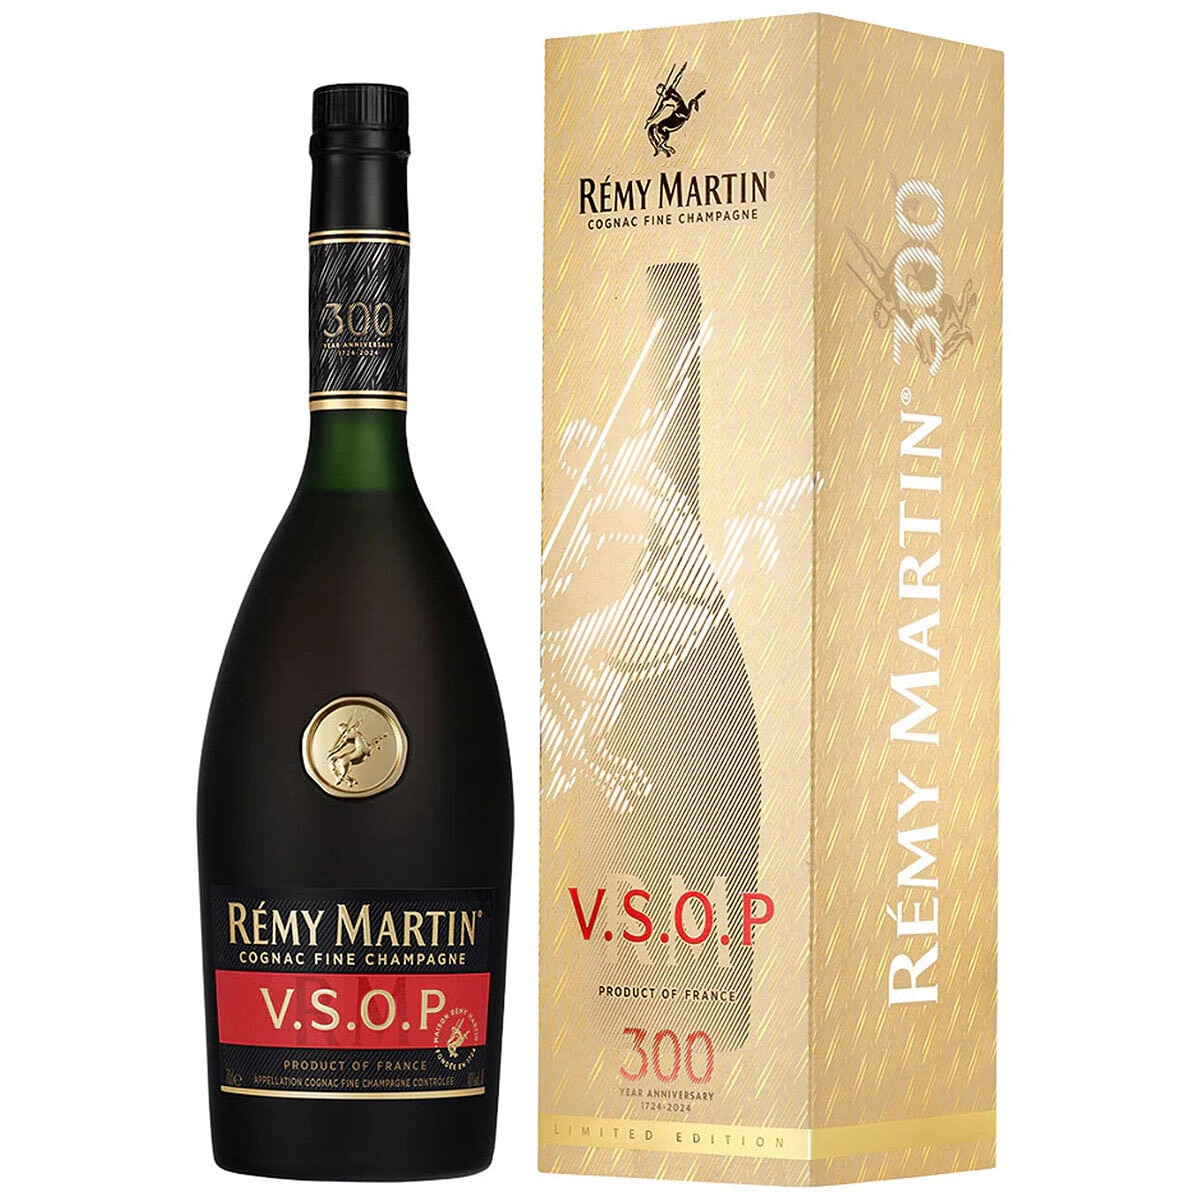 Remy Martin VSOP Cognac Limited Edition 700mL